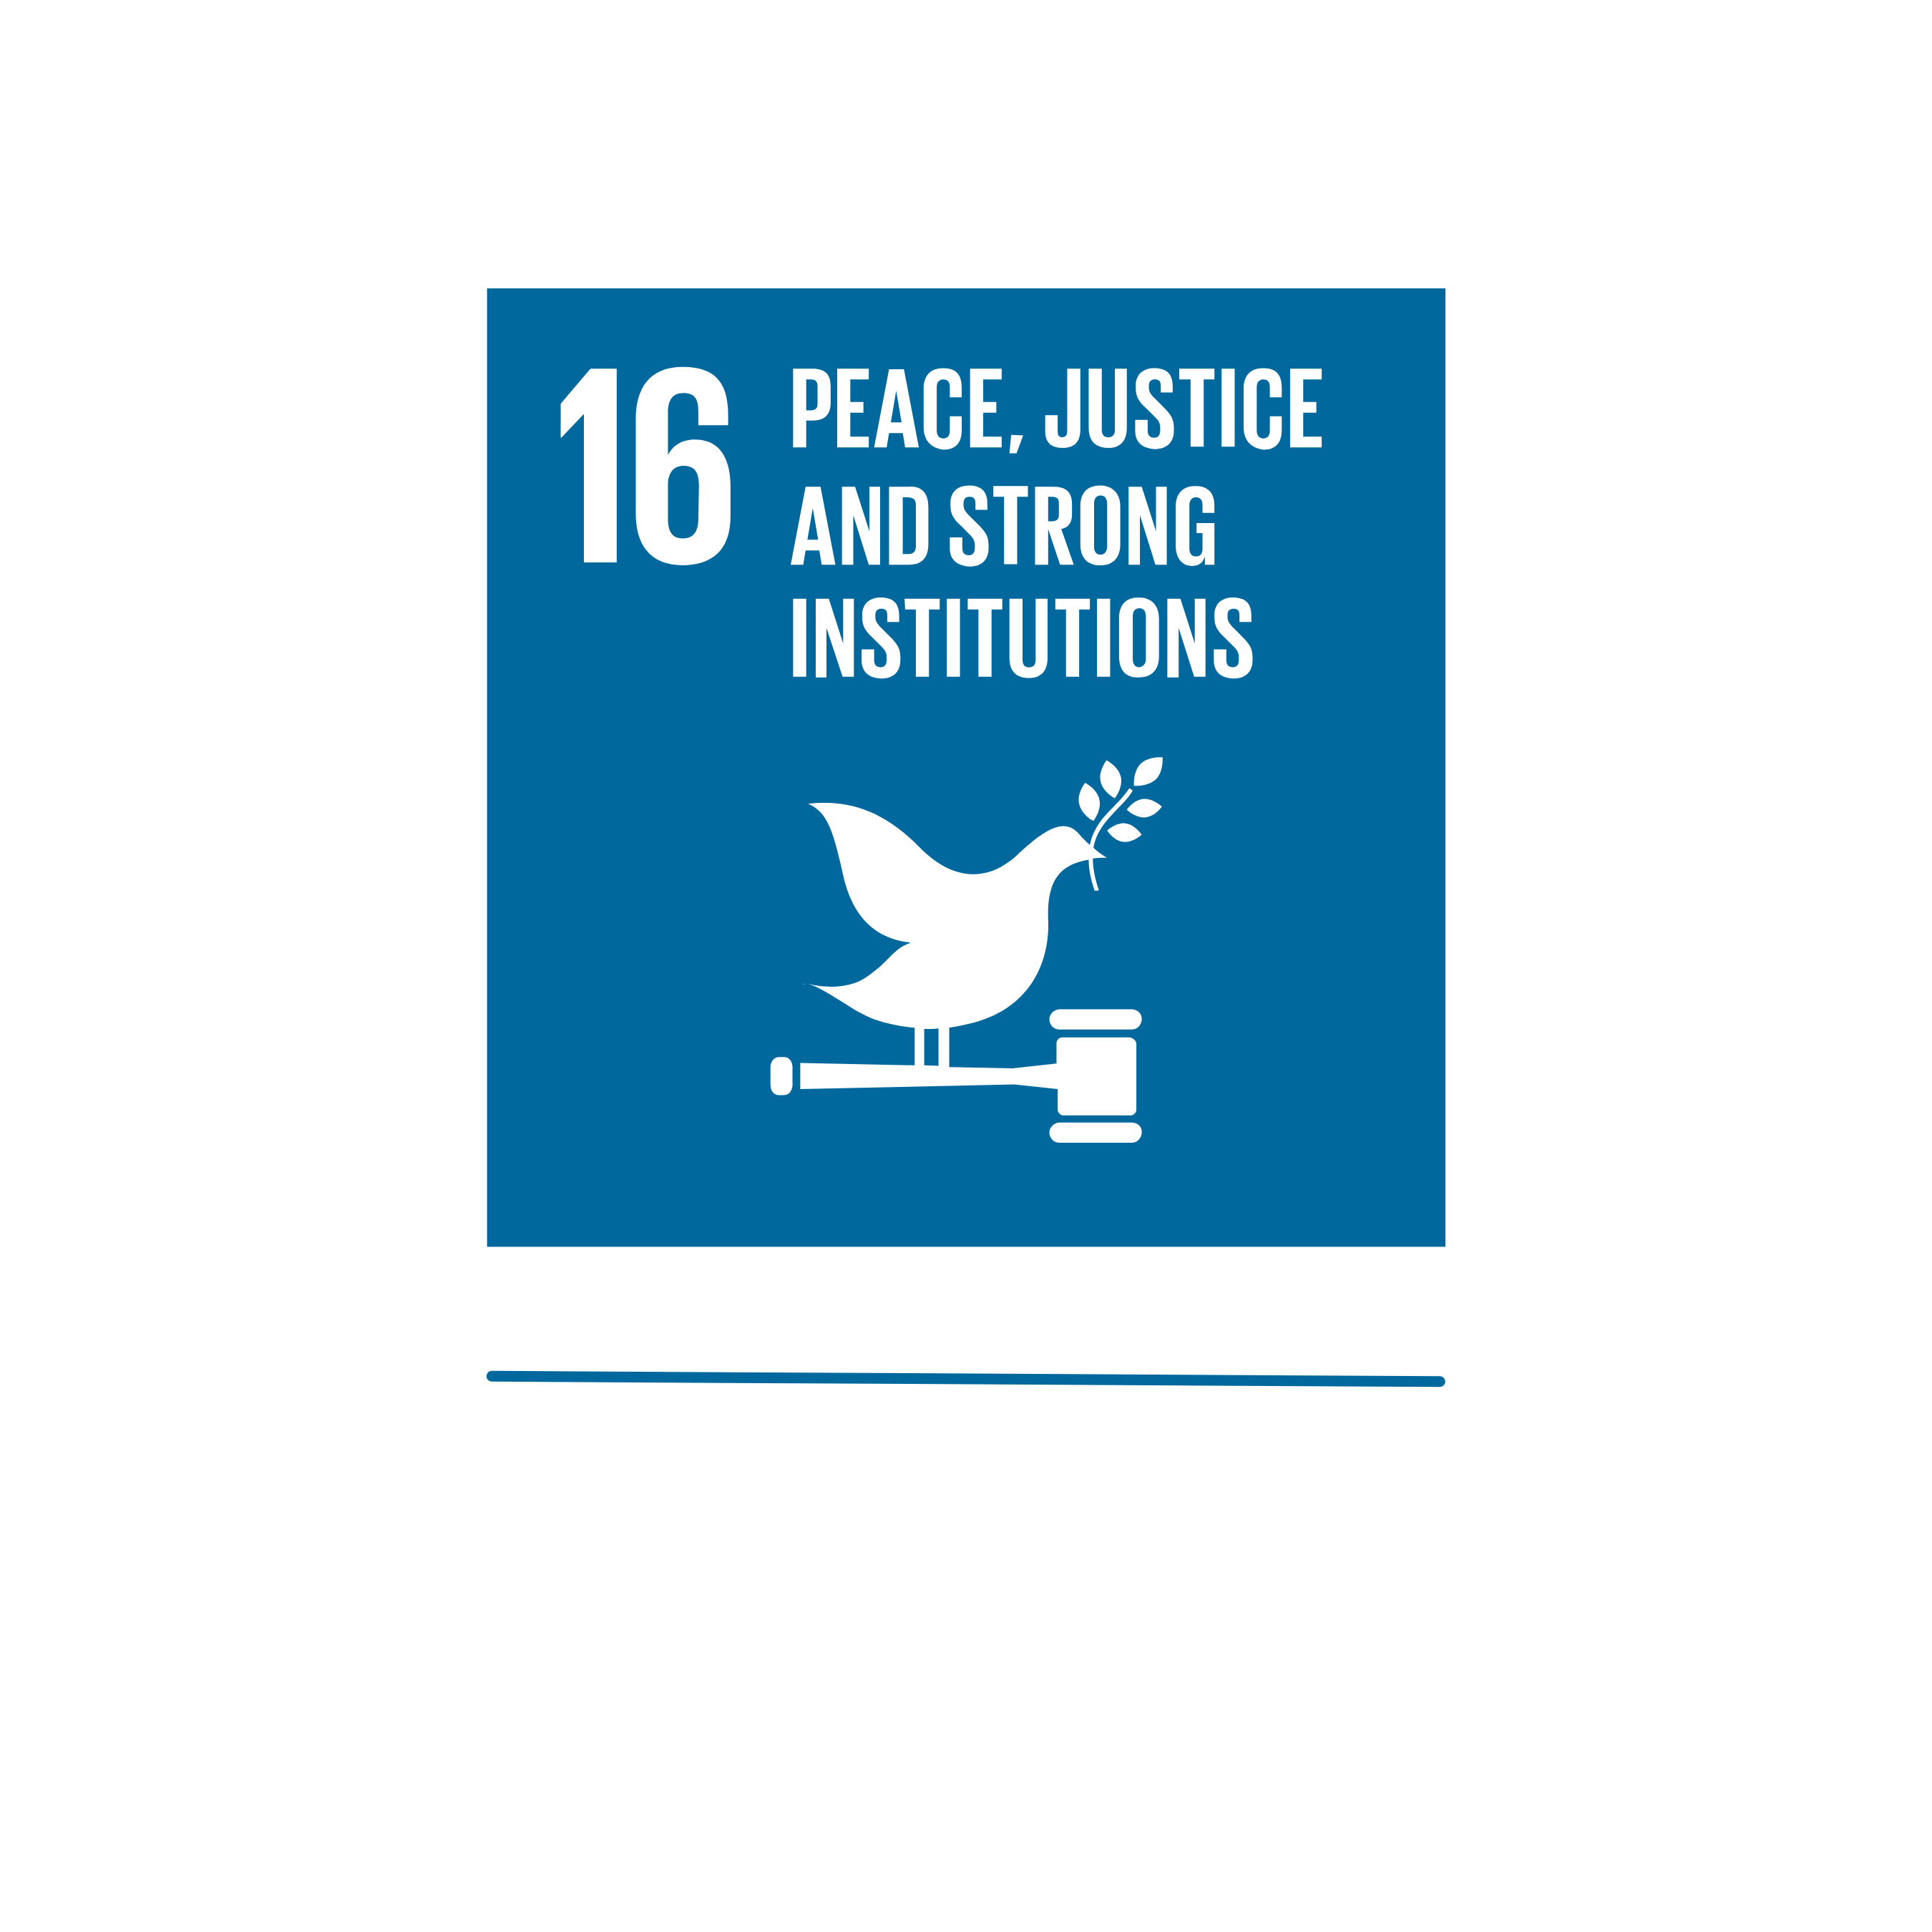 This is a picture of SDG 16, which stands for less peace, justice, and strong institutions. SUMM advocates for peace, justice and strong communication under SDG 16.